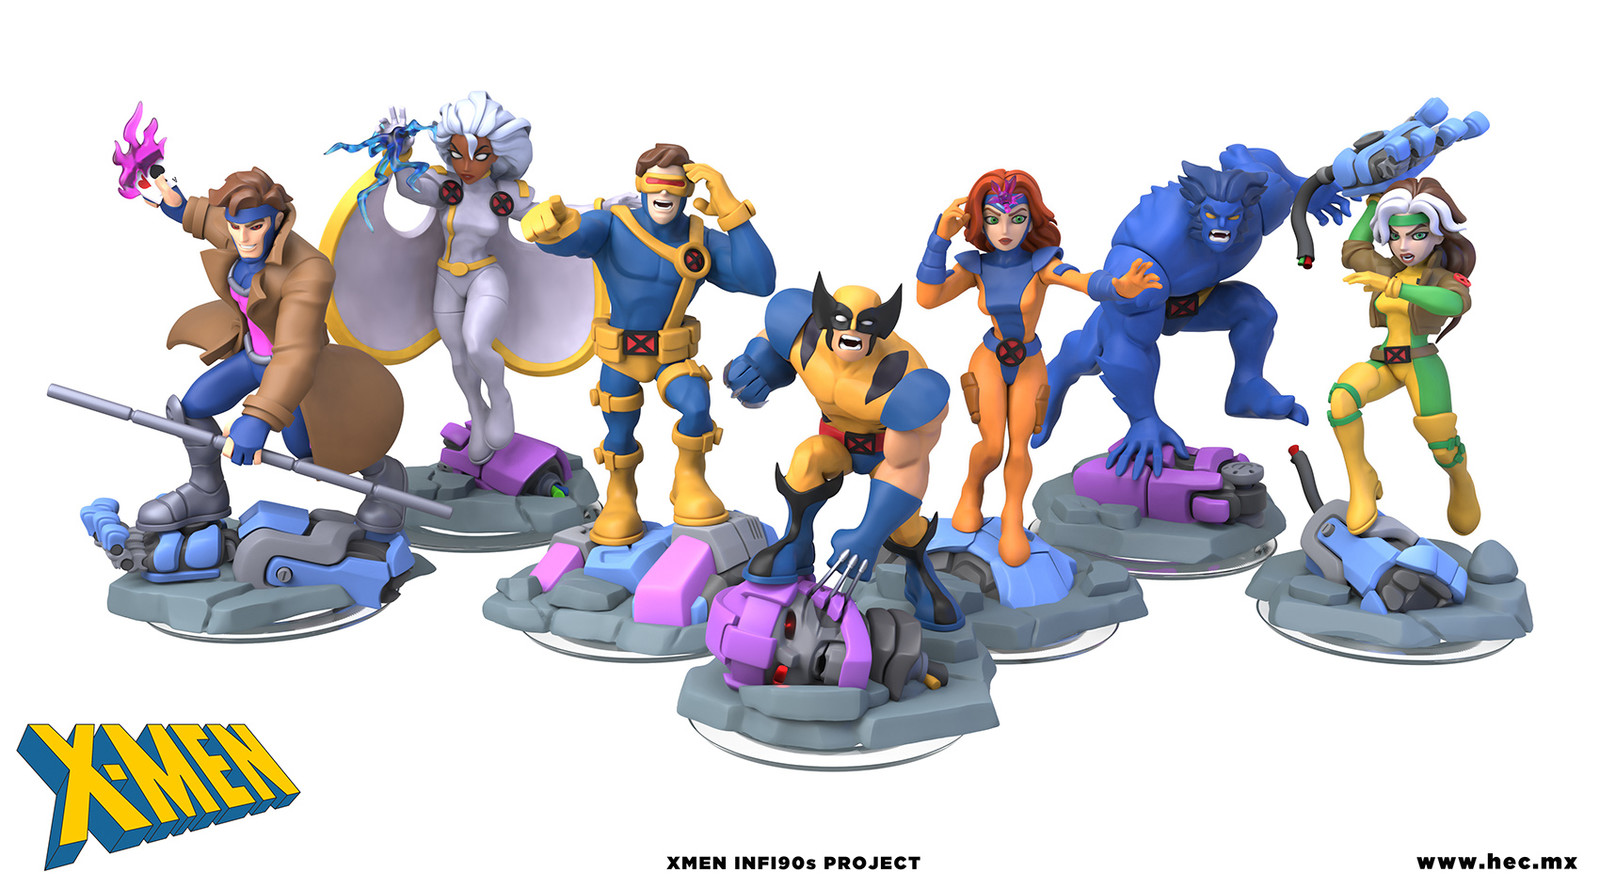 X-Men Inf90s Project And Making Of